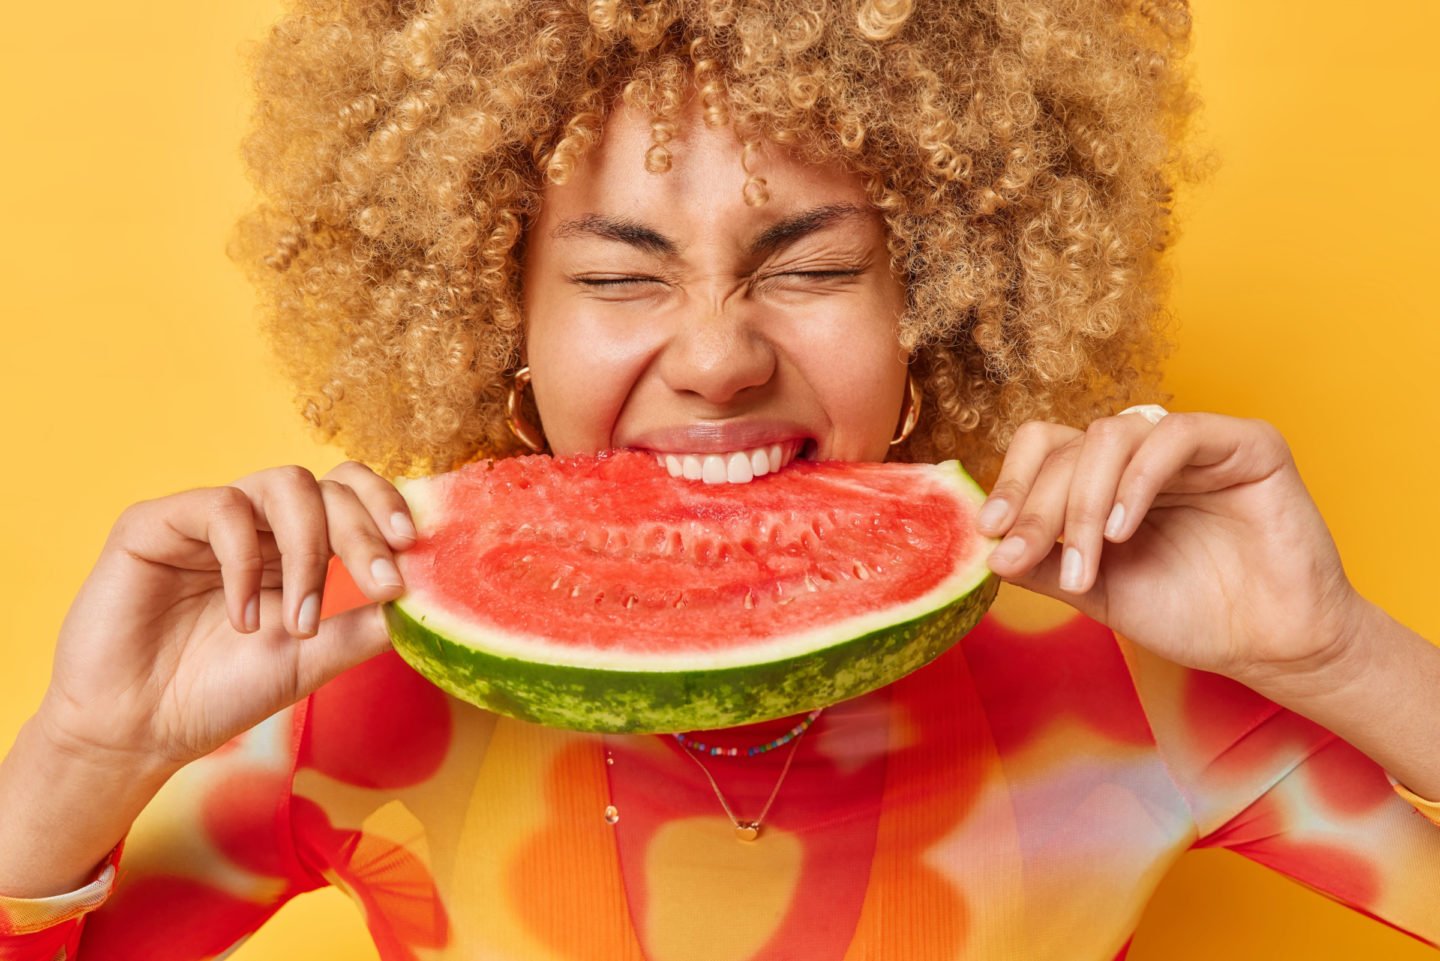 young woman eating a slice of watermelon